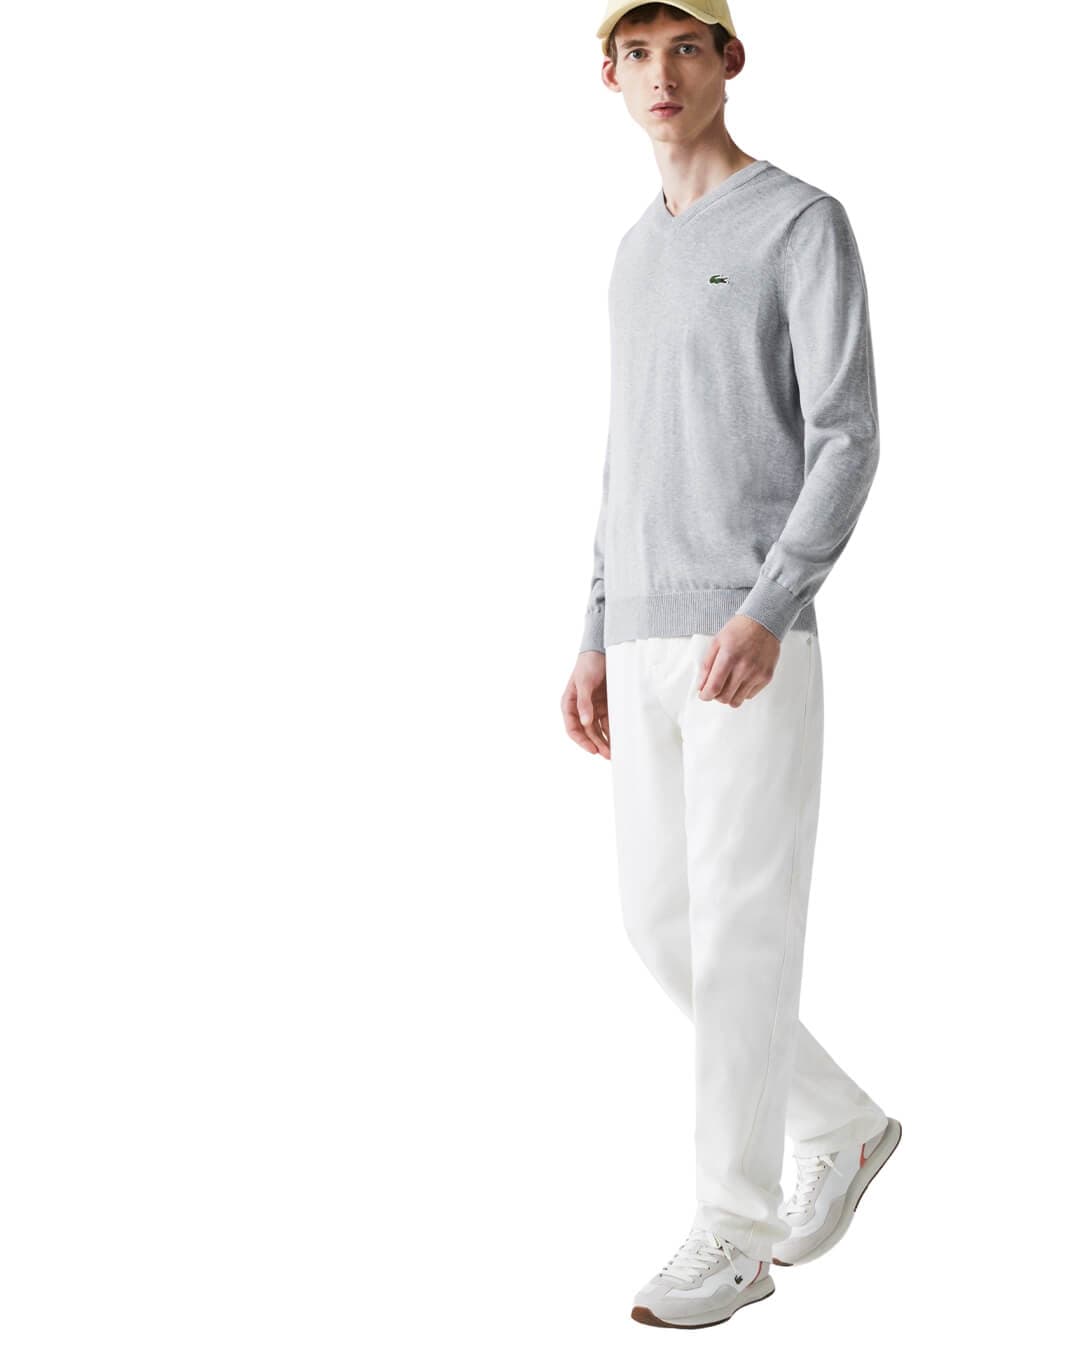 Lacoste Jumpers Lacoste V-neck Organic Cotton Grey Jumper